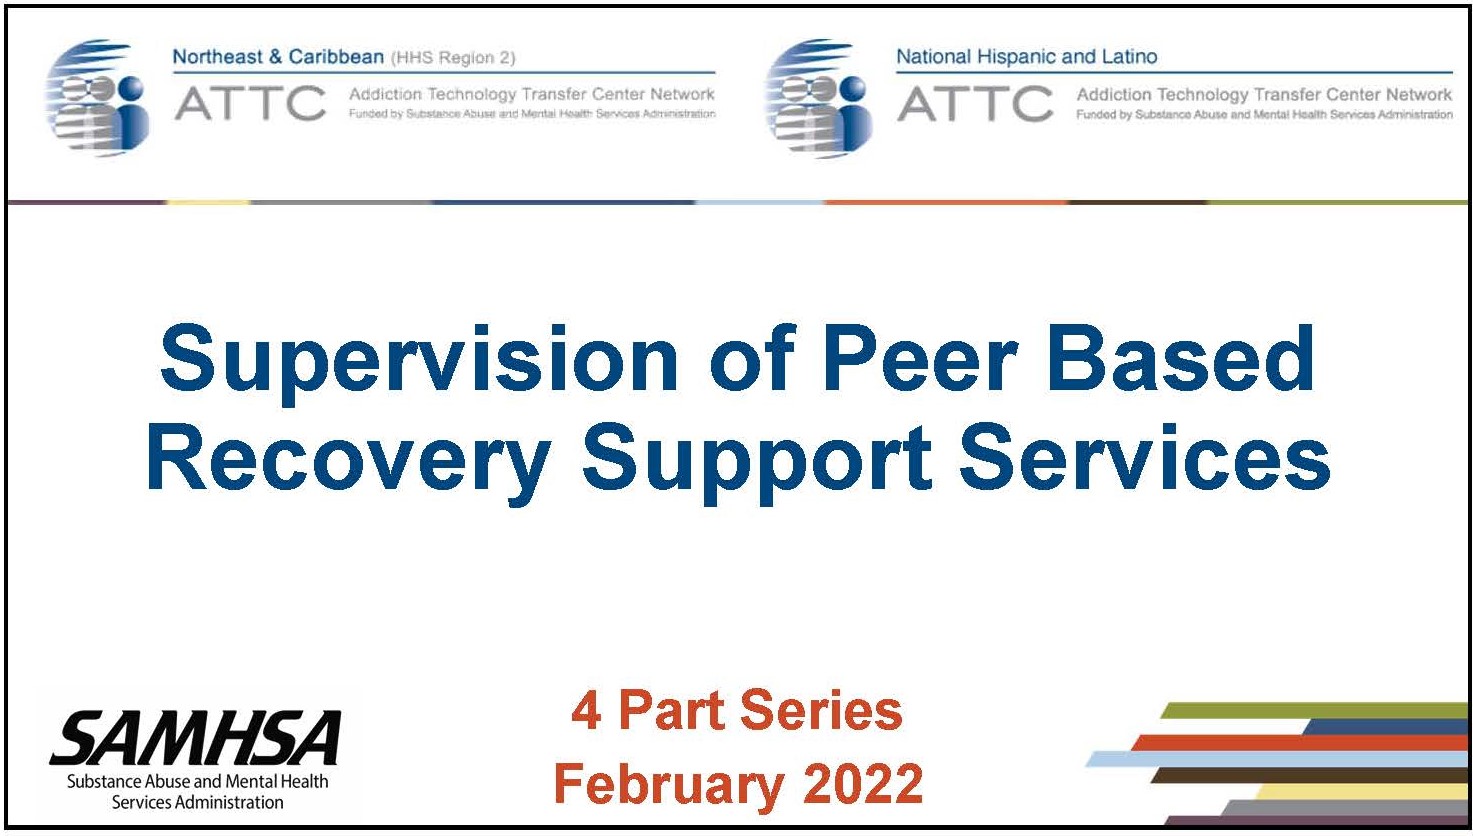 PPT Title Page- Supervision of Peer Based Recovery Support Services - with NeC-ATTC, NHLATTC and SAMHSA logos